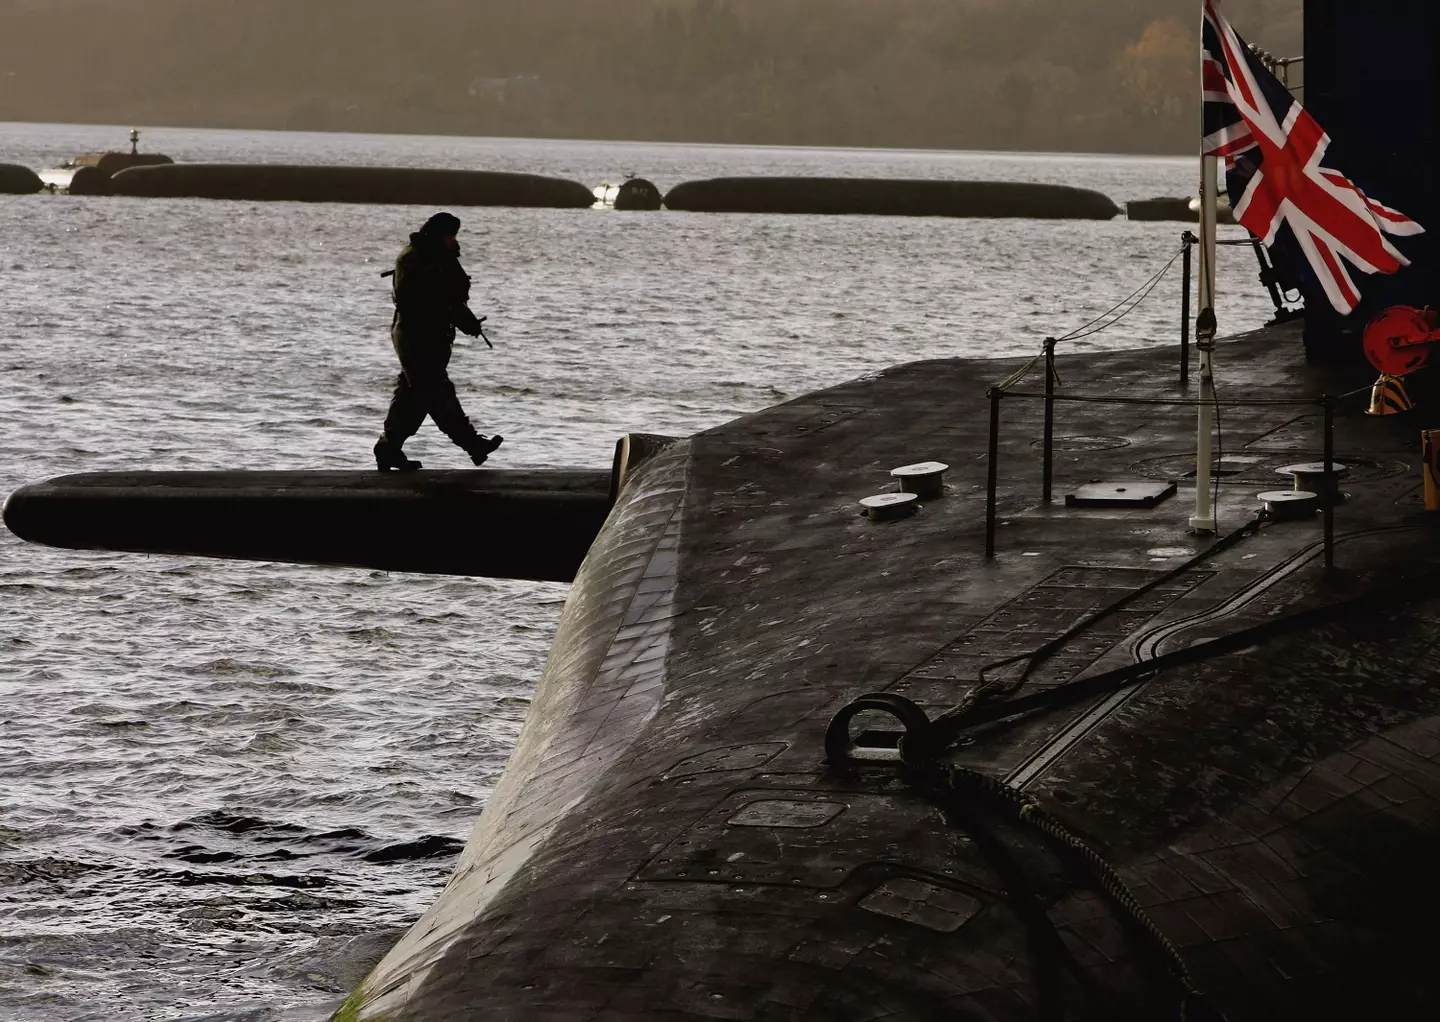 While their name suggests they'd be at the forefront of an attack, the Royal Navy's Vanguard-class submarines are more like the UK's last resort.